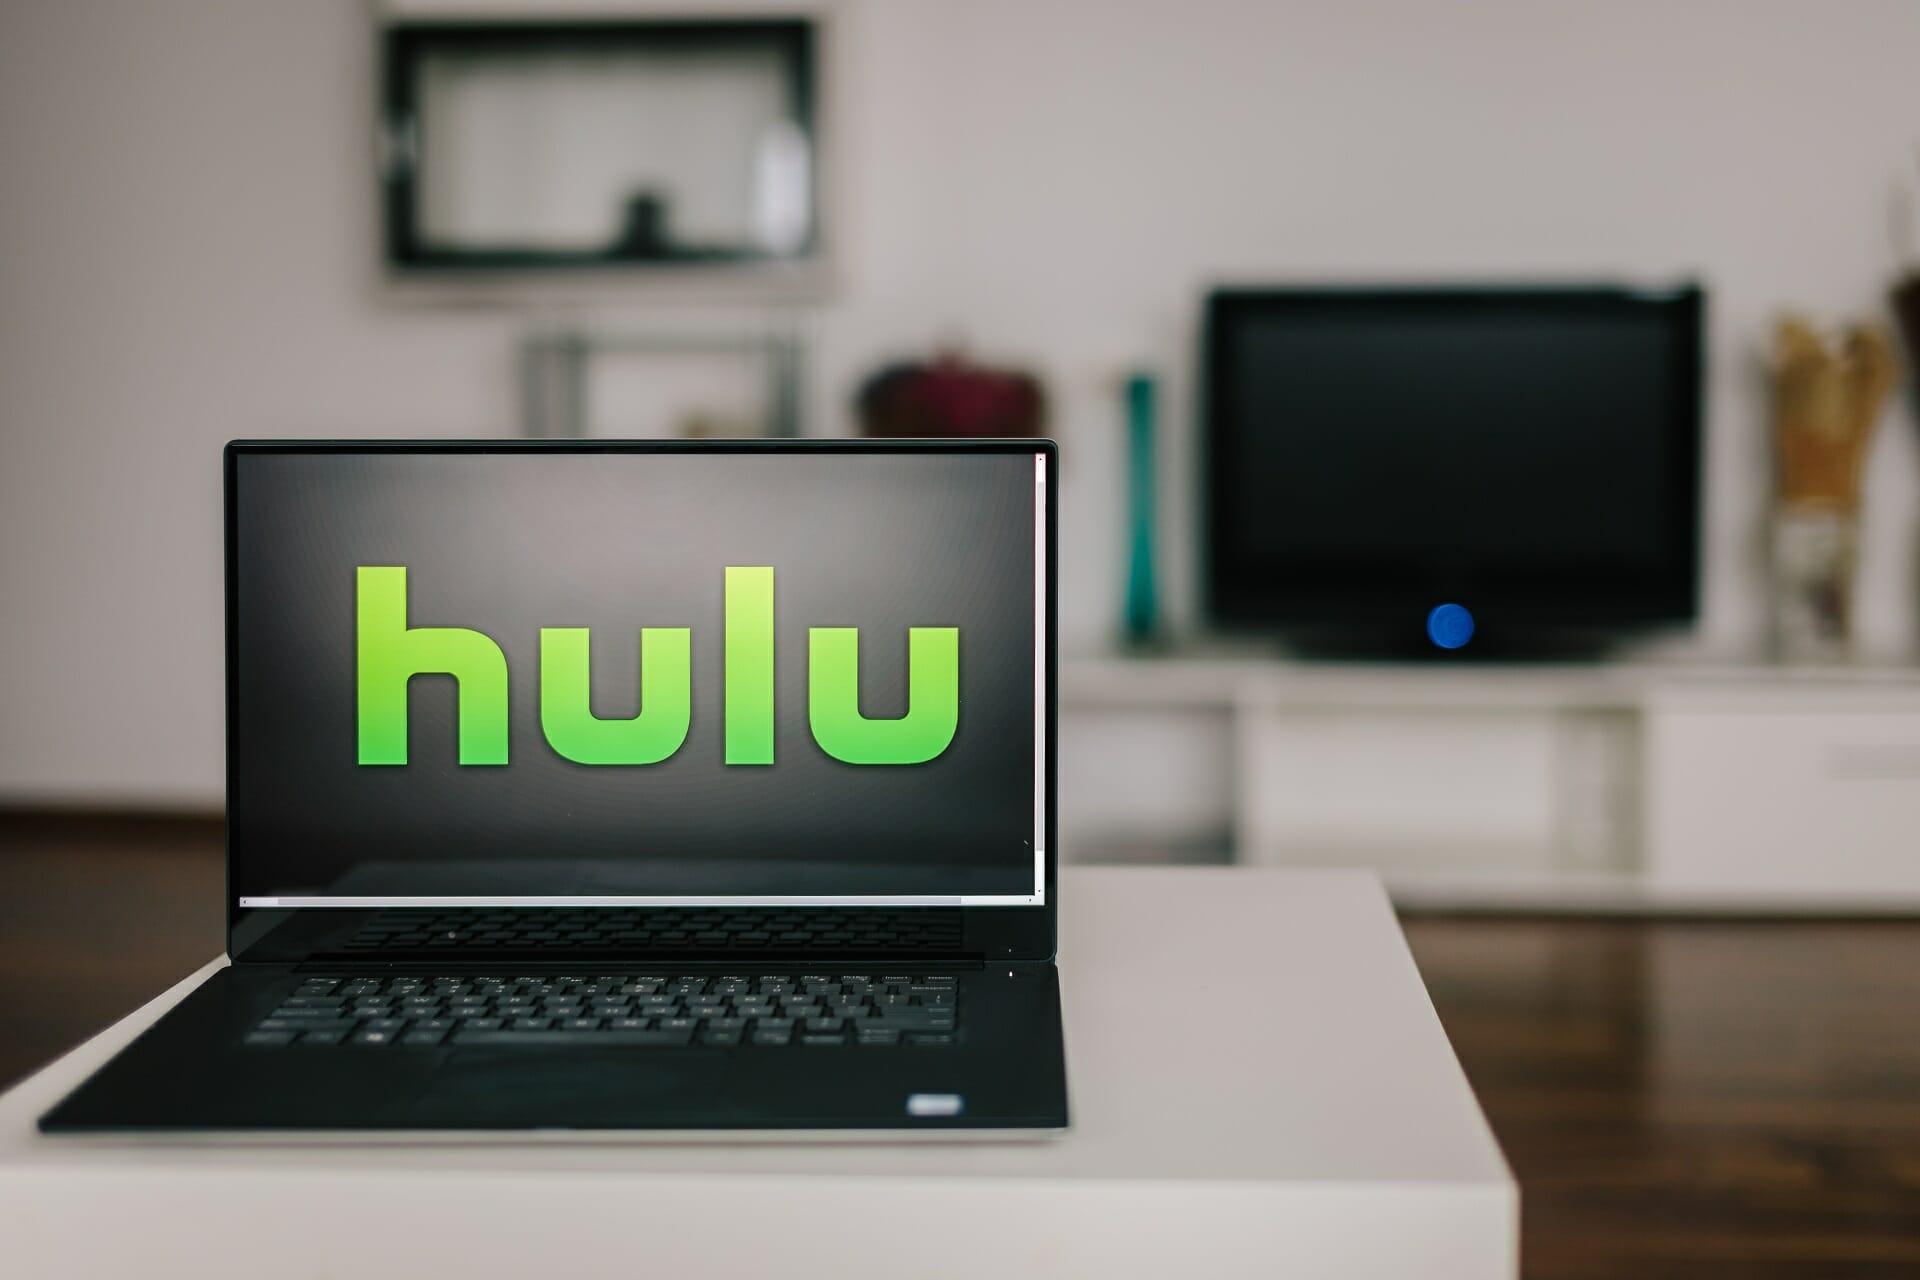 What are the best VPN to watch Hulu streaming on Windows 10